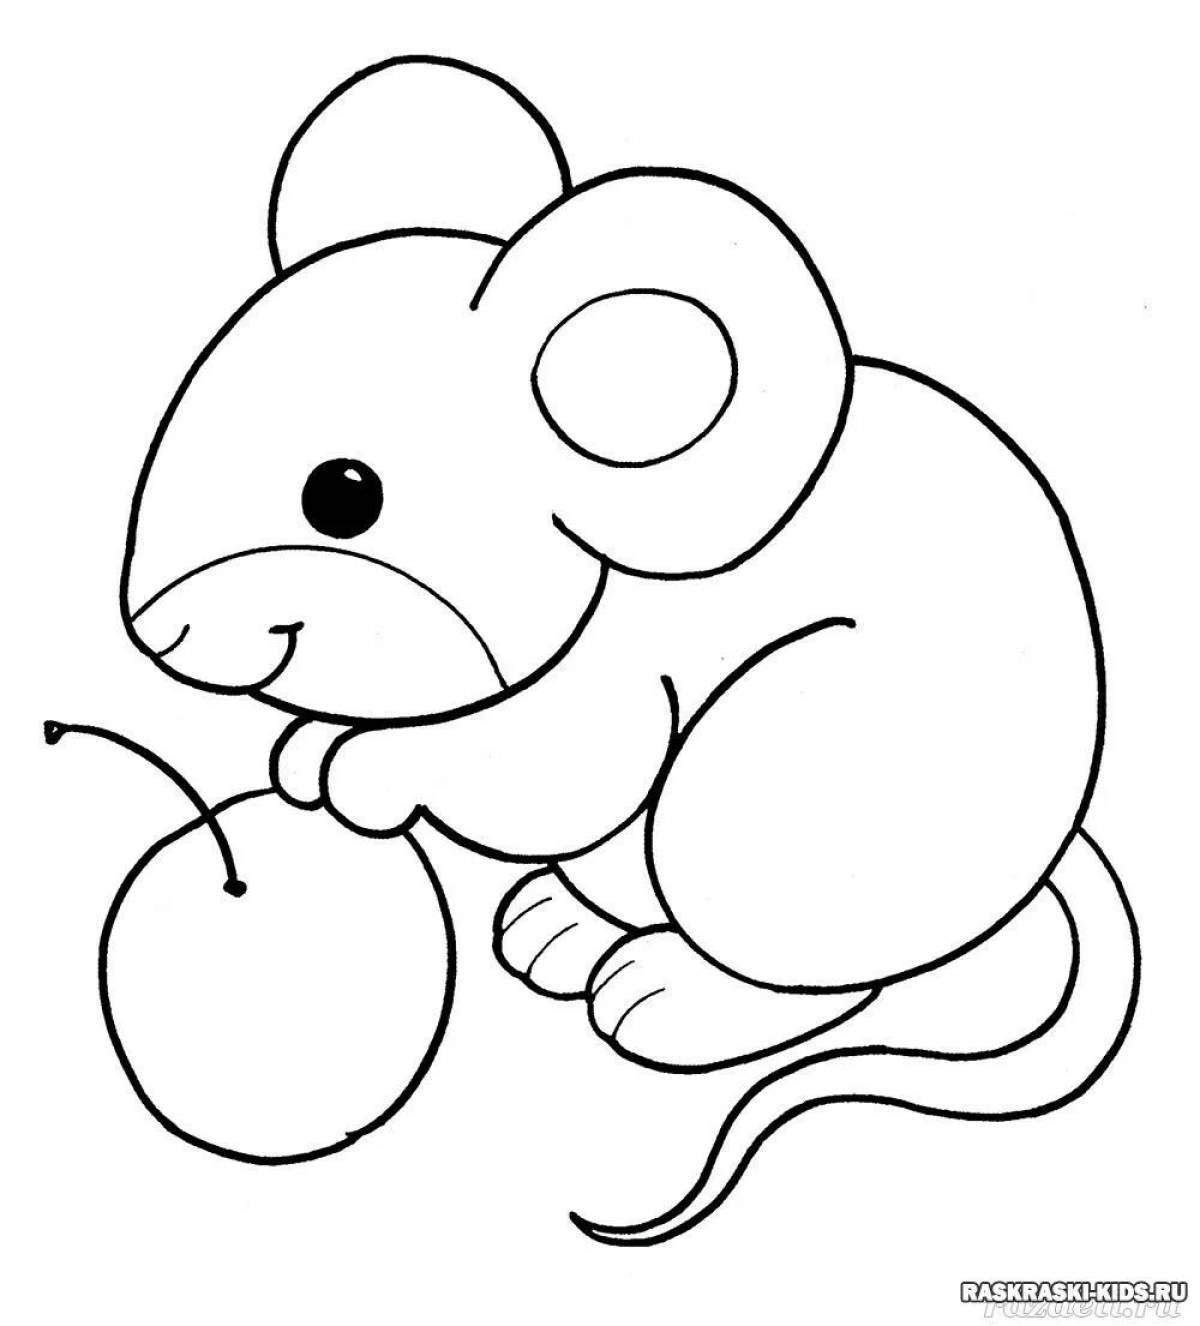 Live coloring mouse for children 2-3 years old